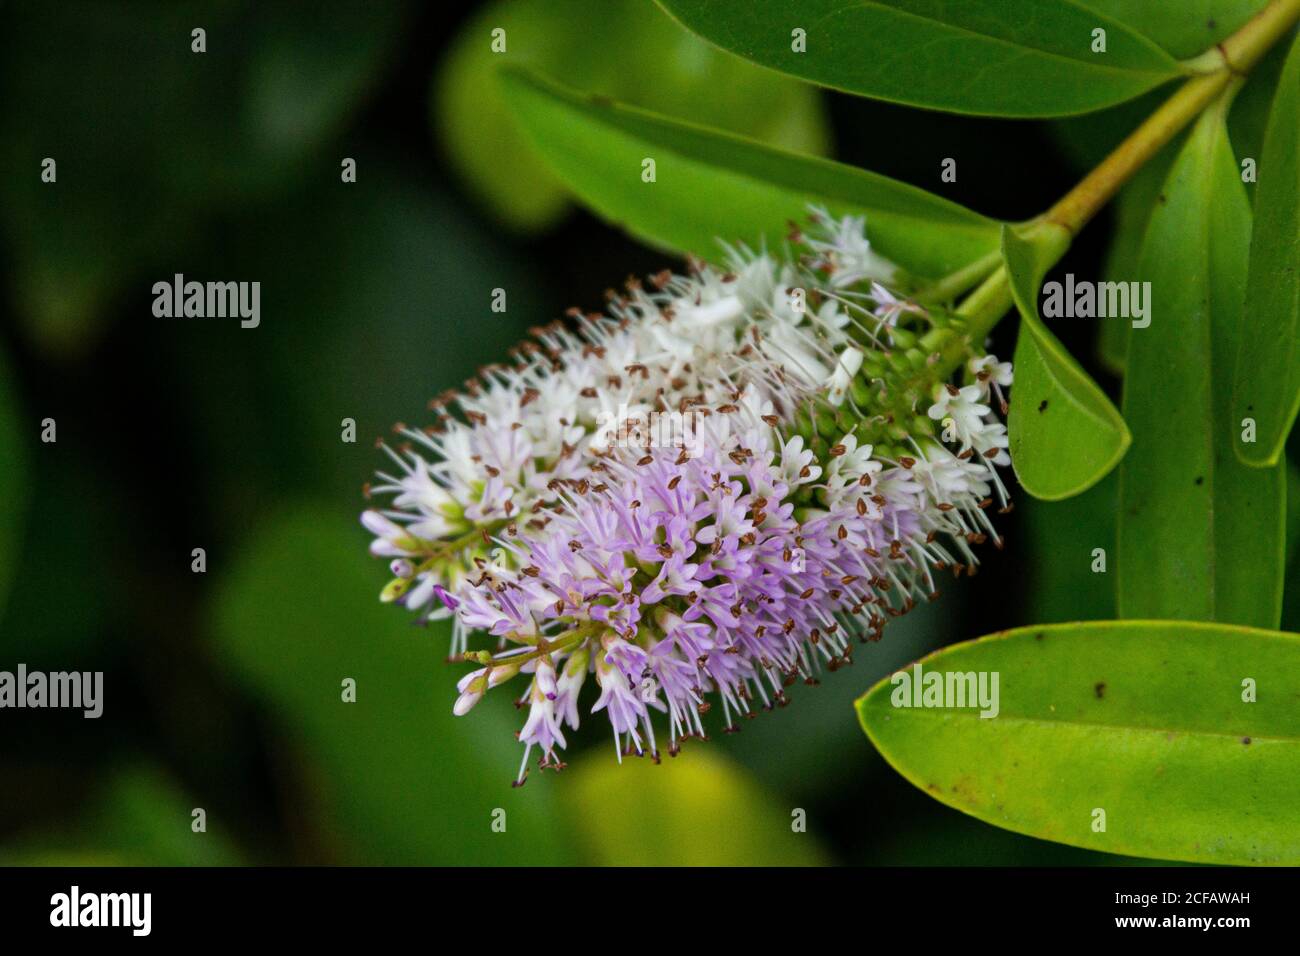 The flower spike of a Hebe (Veronica sect. Hebe) Stock Photo